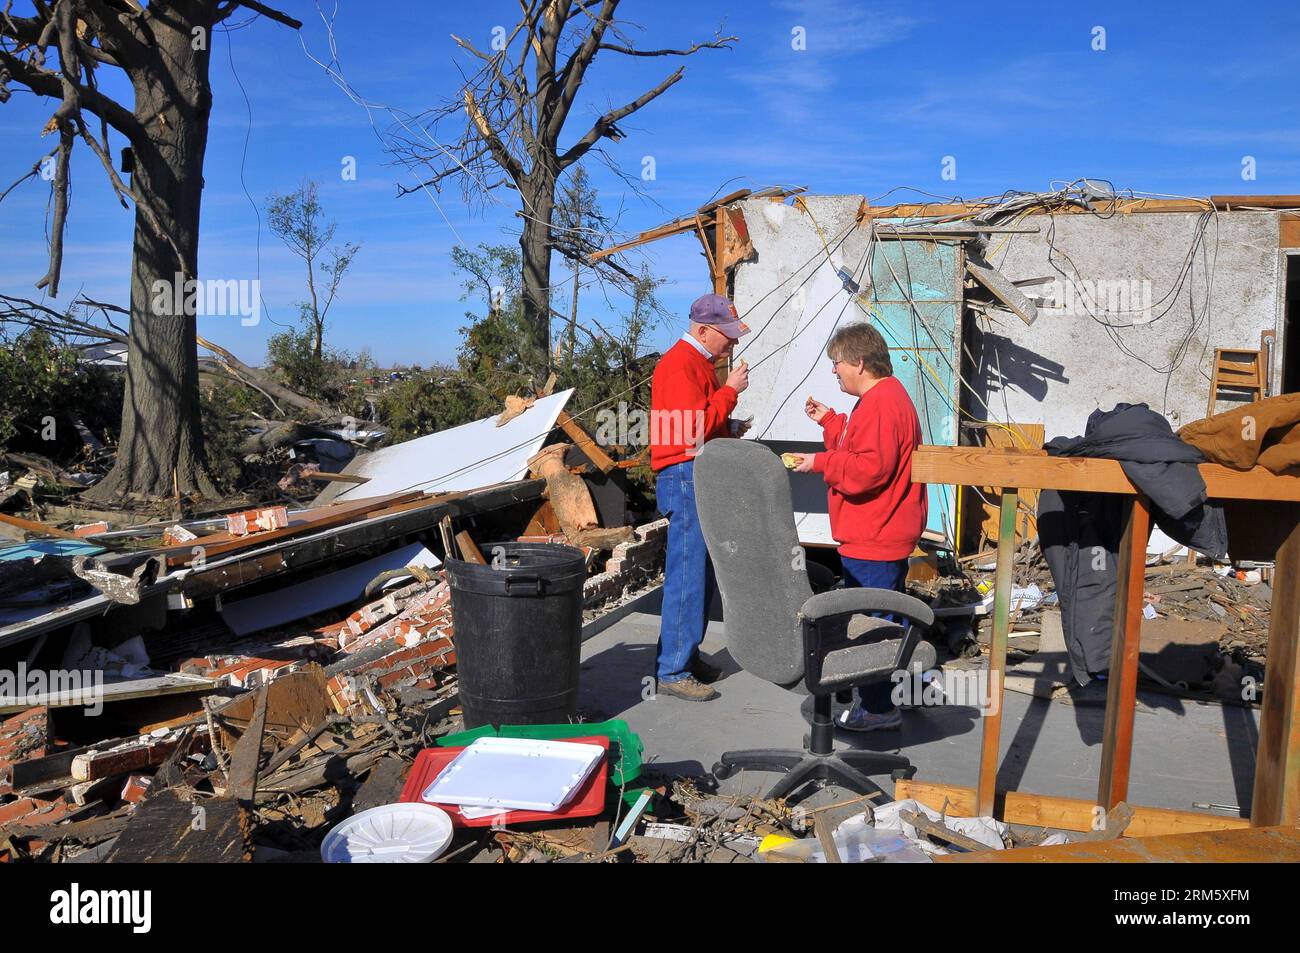 Bildnummer: 60732977  Datum: 19.11.2013  Copyright: imago/Xinhua ILLINOIS, Nov. 19, 2013 (Xinhua) -- Local residents work in ruins after a tornado attack in the town of Washington in Illinois, the United States, on Nov. 19, 2013. At least 16 were killed during tornado attacks on Sunday, according to the National Weather Service. (Xinhua/Zhang Baoping)(ybg) US-ILLINOIS-TORNADO PUBLICATIONxNOTxINxCHN Gesellschaft USA Naturkatastrophe x0x xsk 2013 quer     60732977 Date 19 11 2013 Copyright Imago XINHUA Illinois Nov 19 2013 XINHUA Local Residents Work in Ruins After a Tornado Attack in The Town o Stock Photo